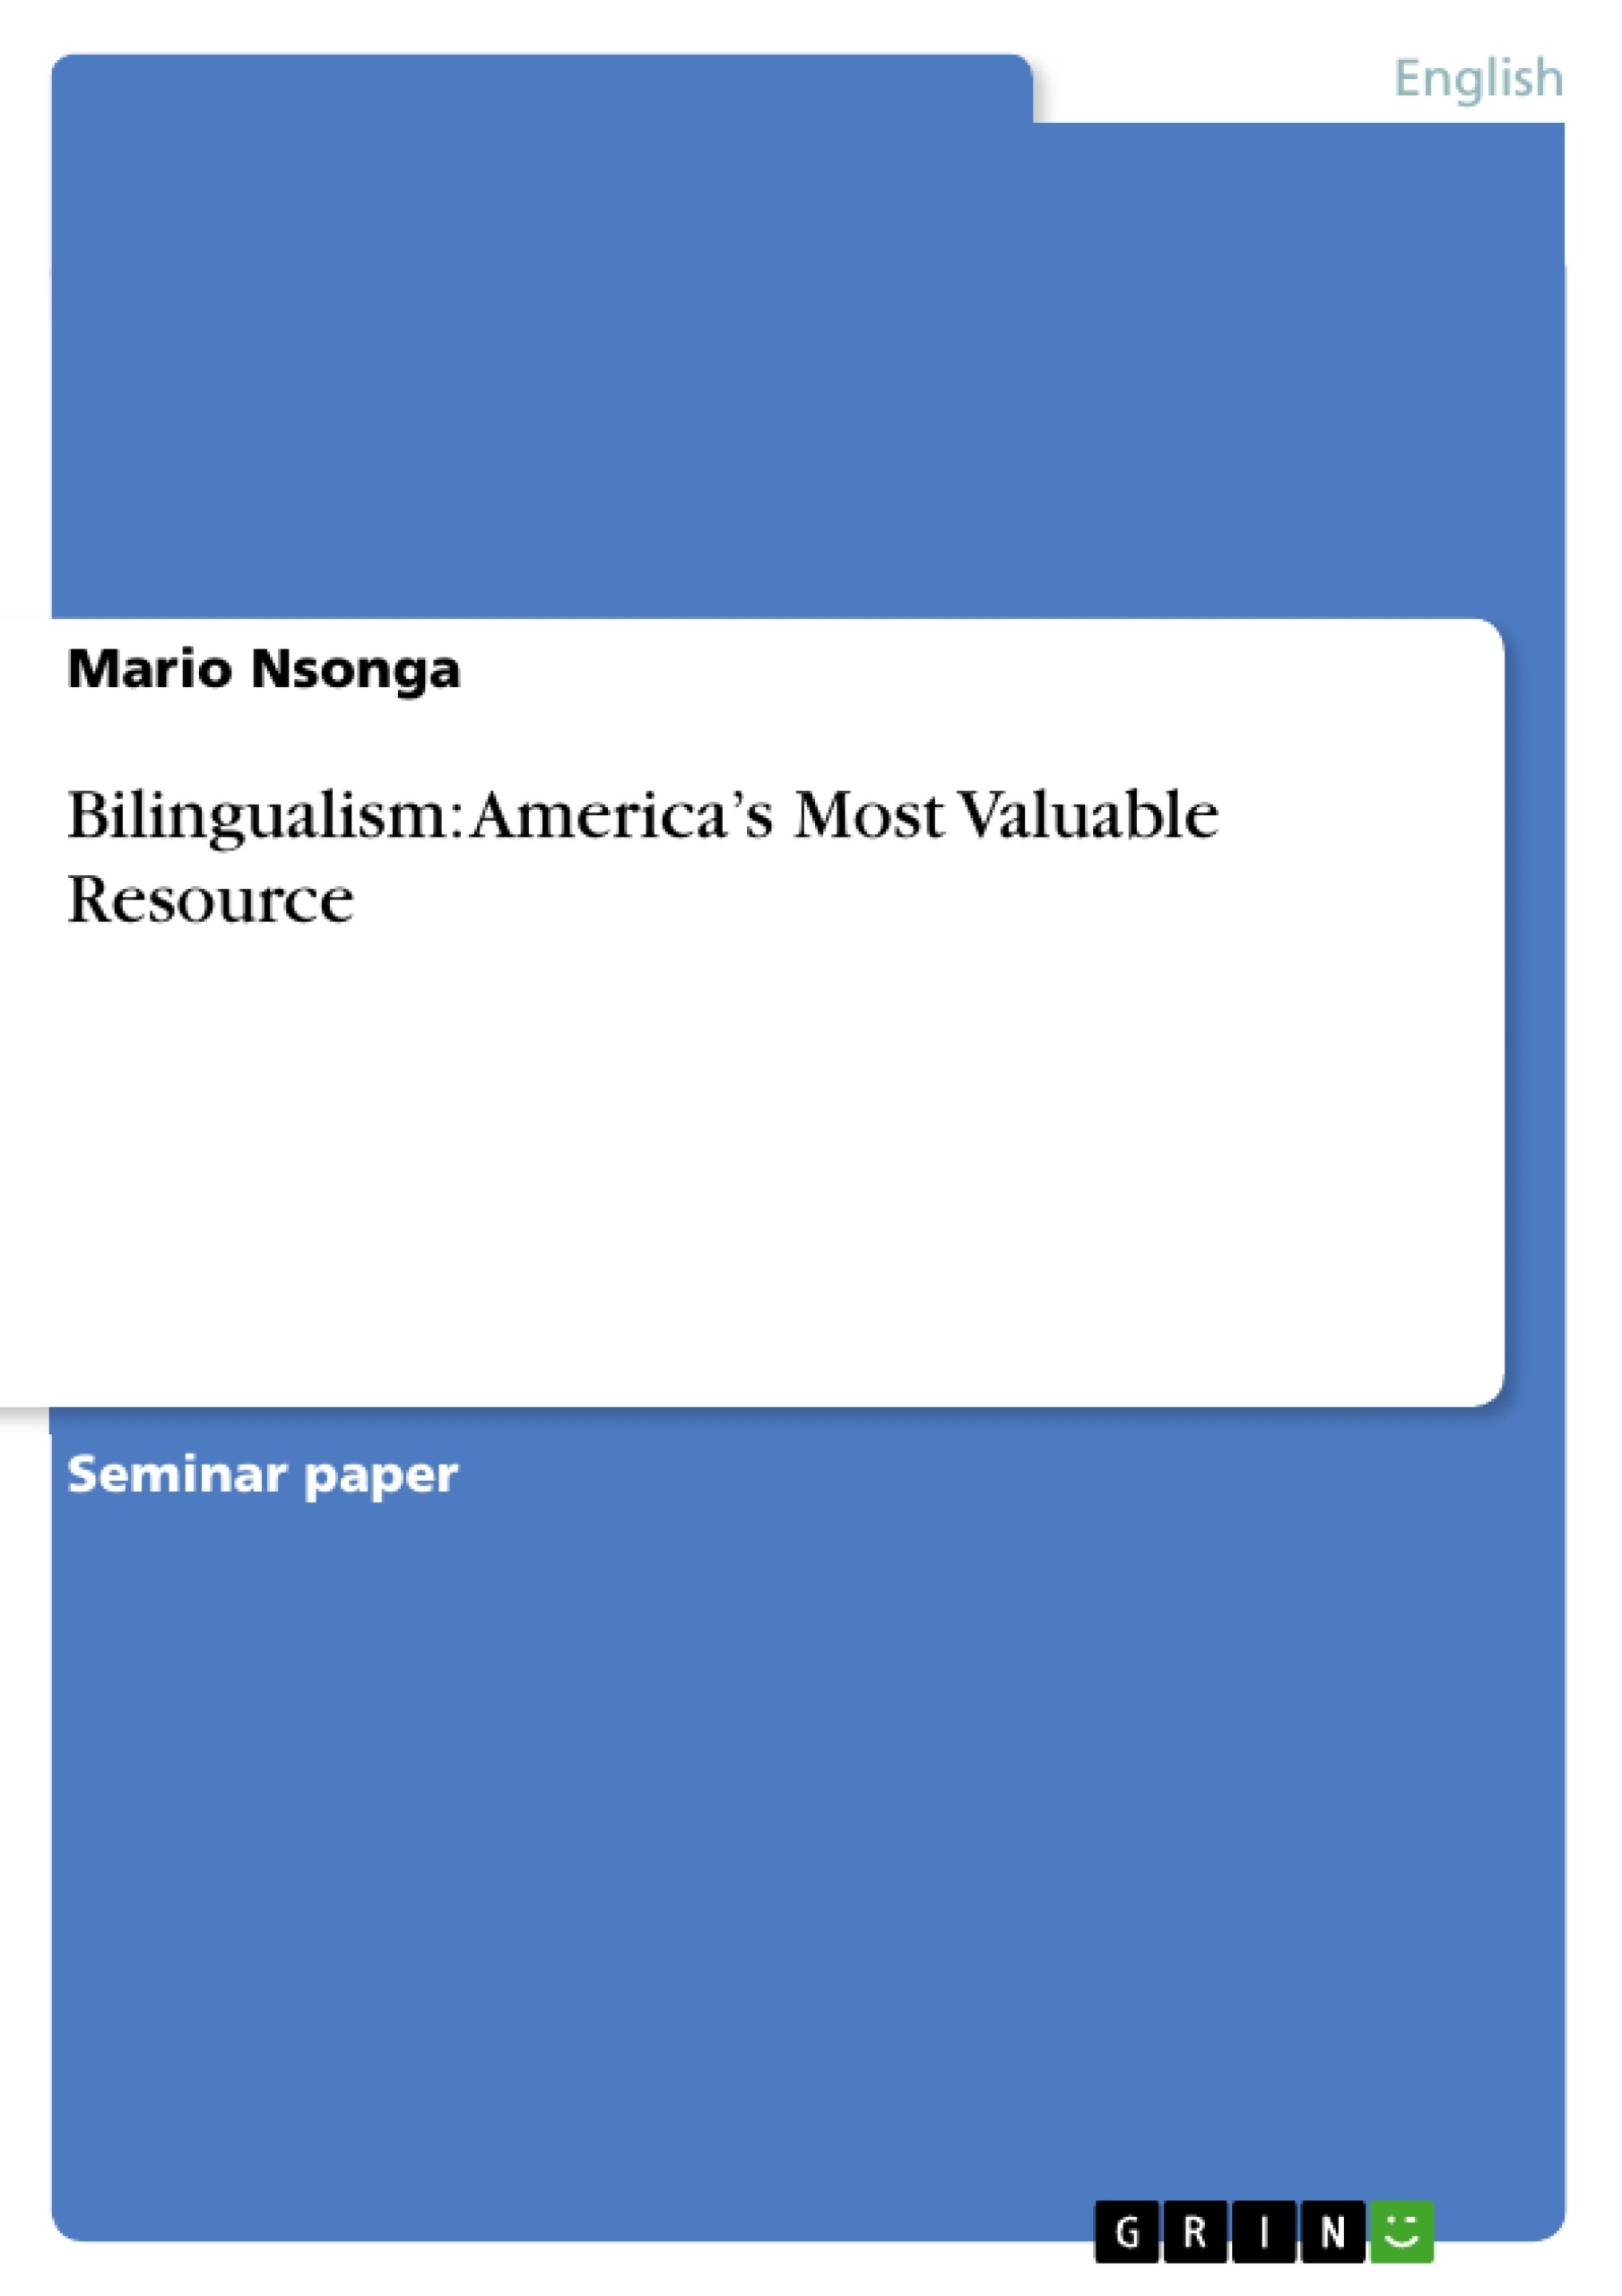 Title: Bilingualism: America’s Most Valuable Resource